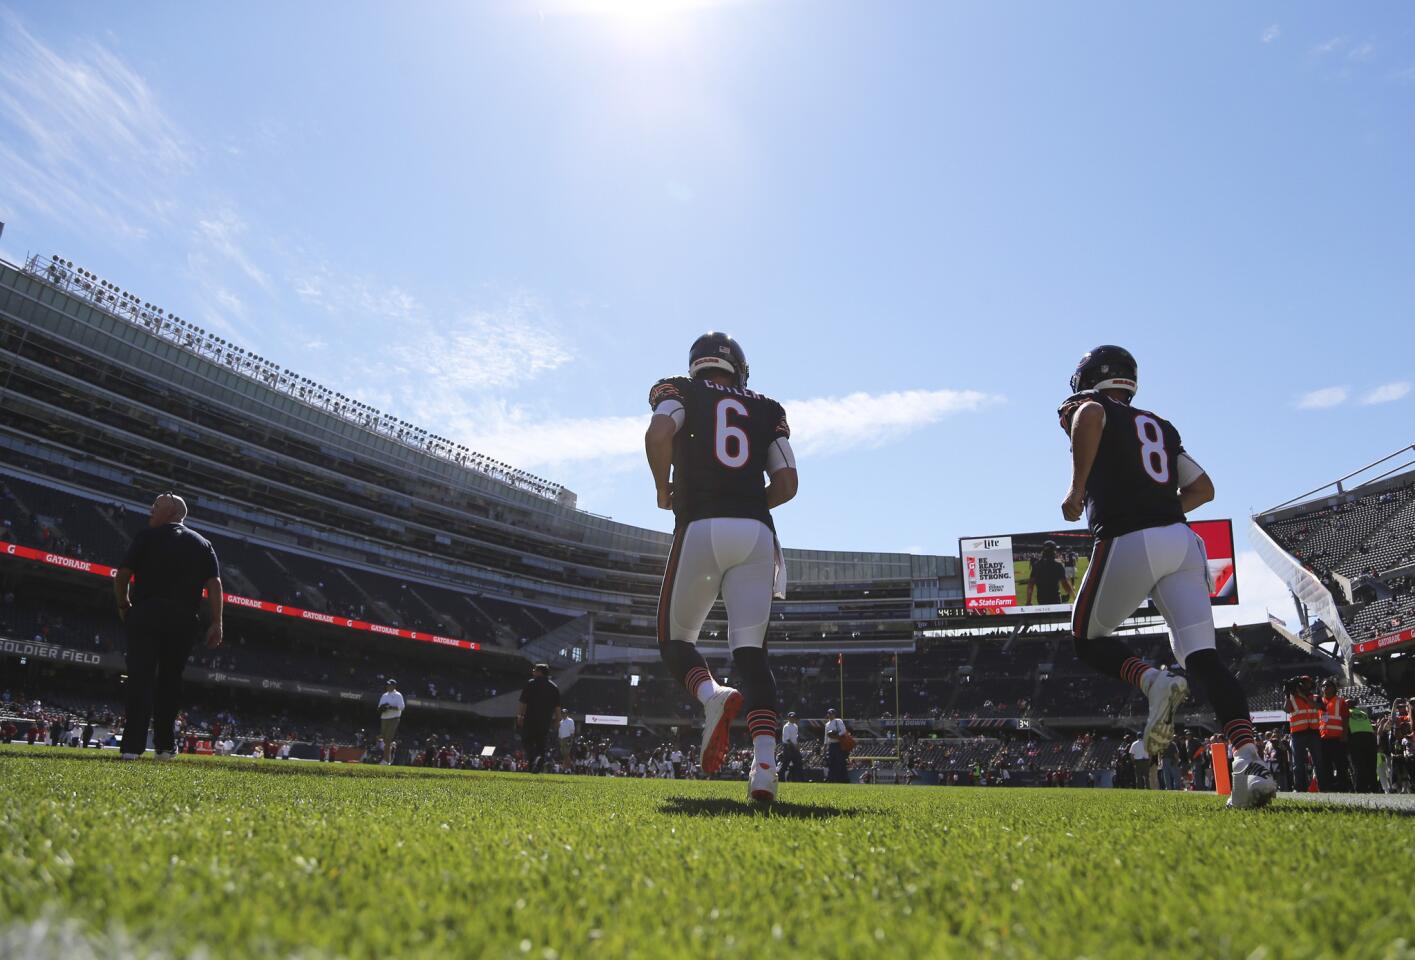 Quarterbacks Jay Cutler and Jimmy Clausen take the field for the Week 2 game against the Cardinals at Soldier Field.